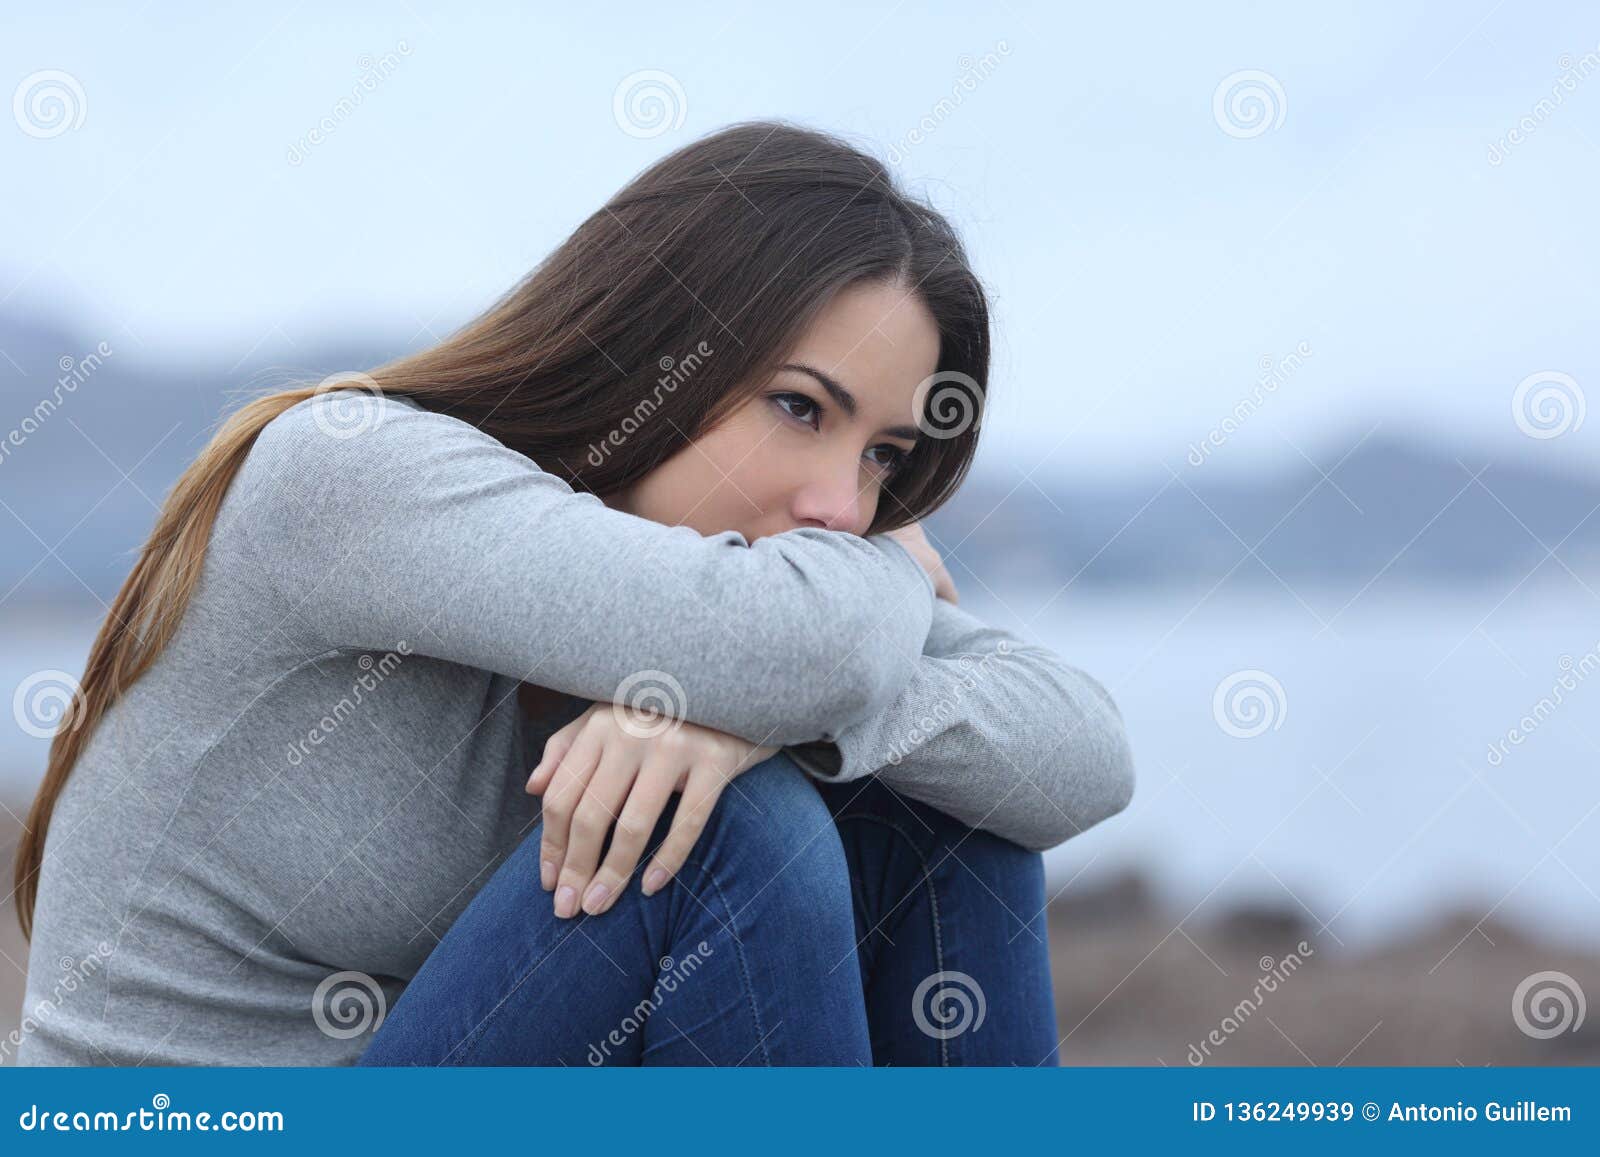 Sad Girl Looking Away Alone on the Beach Stock Image - Image of ...